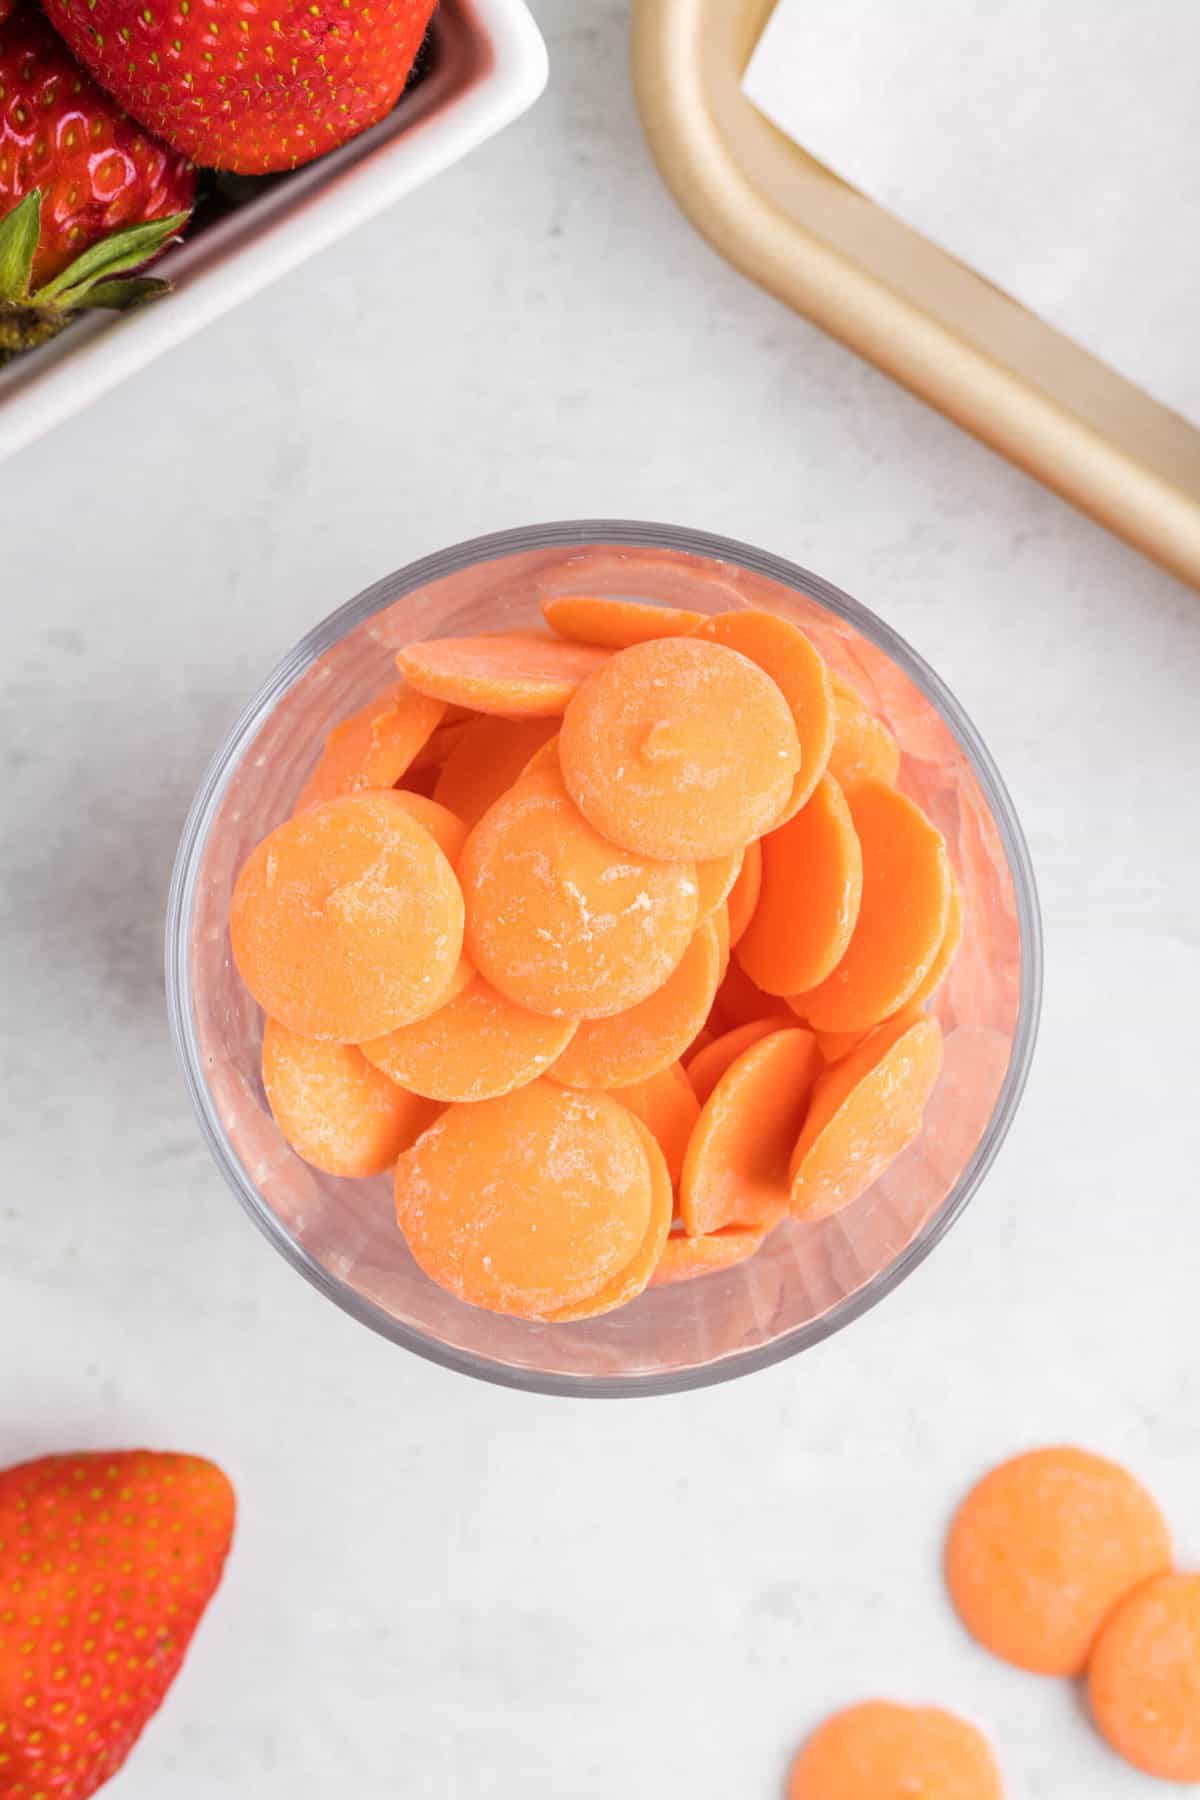 Orange candy melts in a glass bowl.